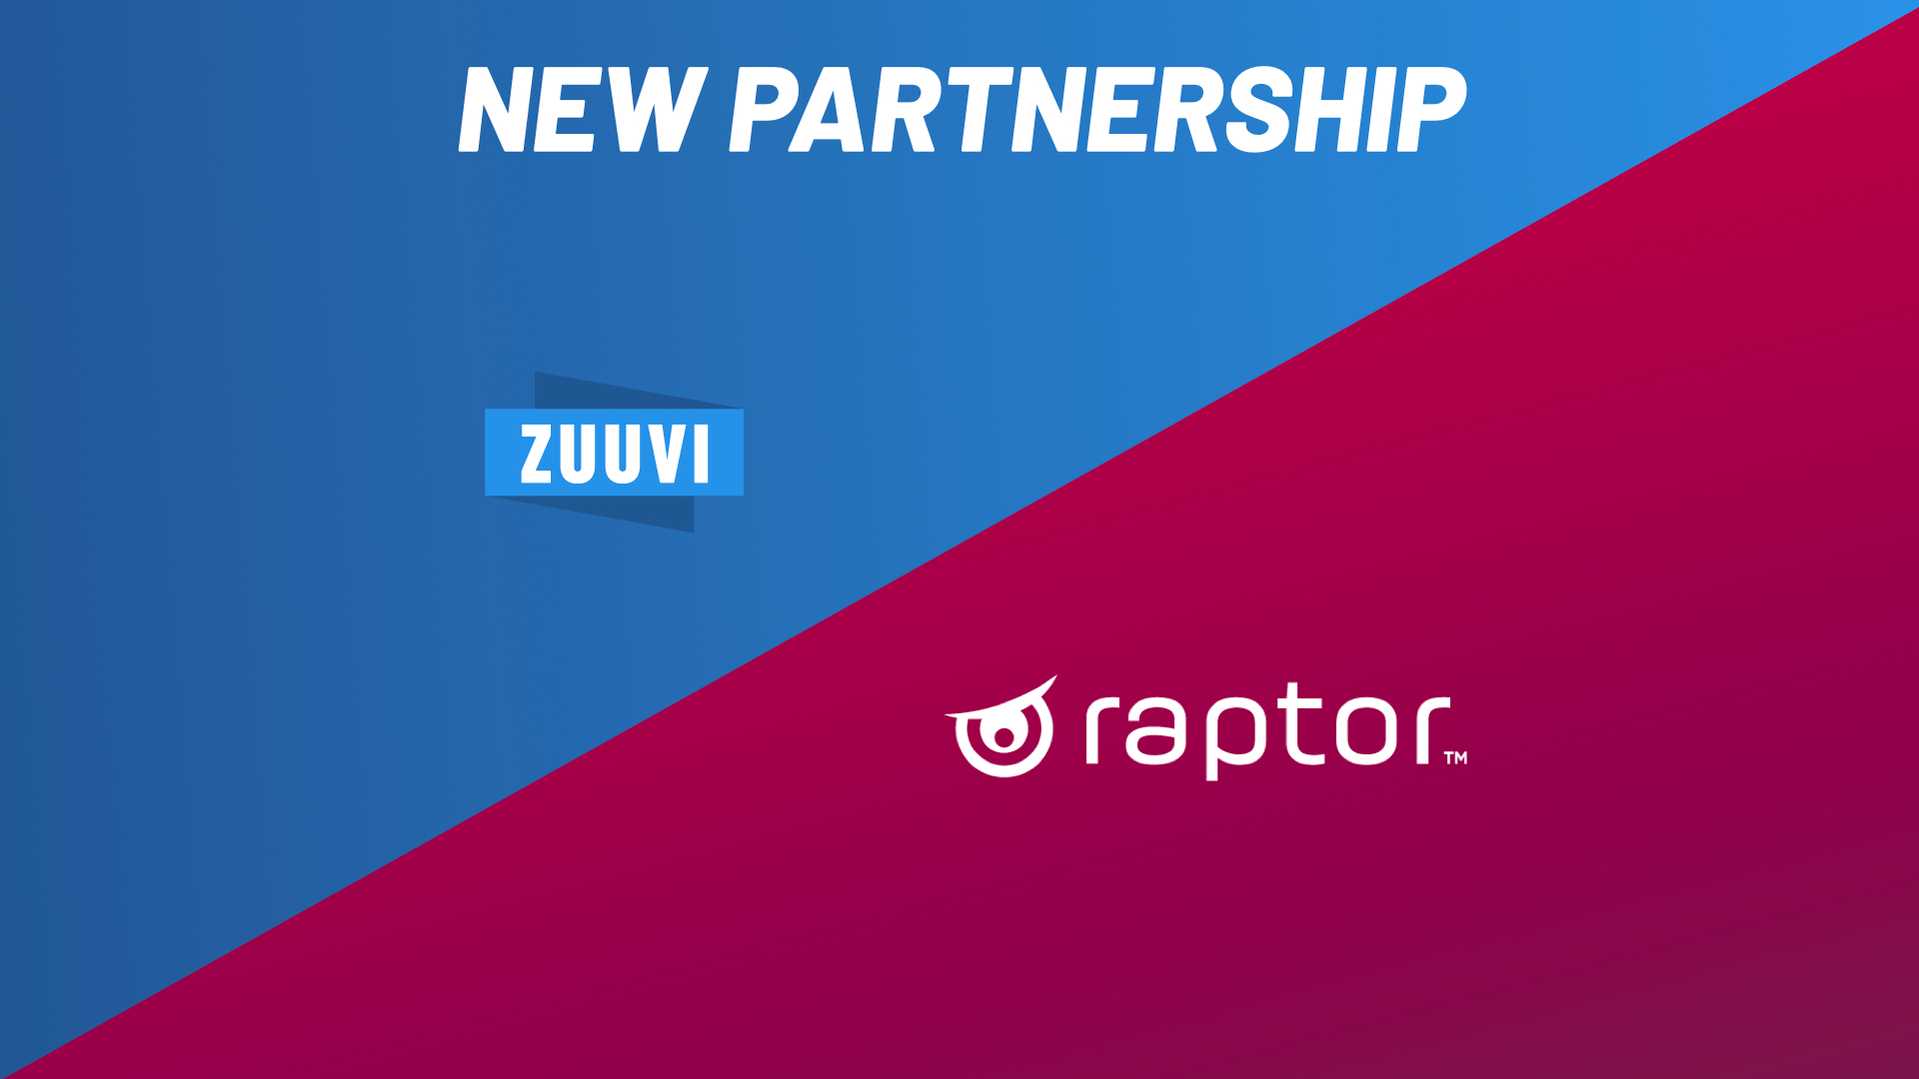 Zuuvi and Raptor Services announce partnership